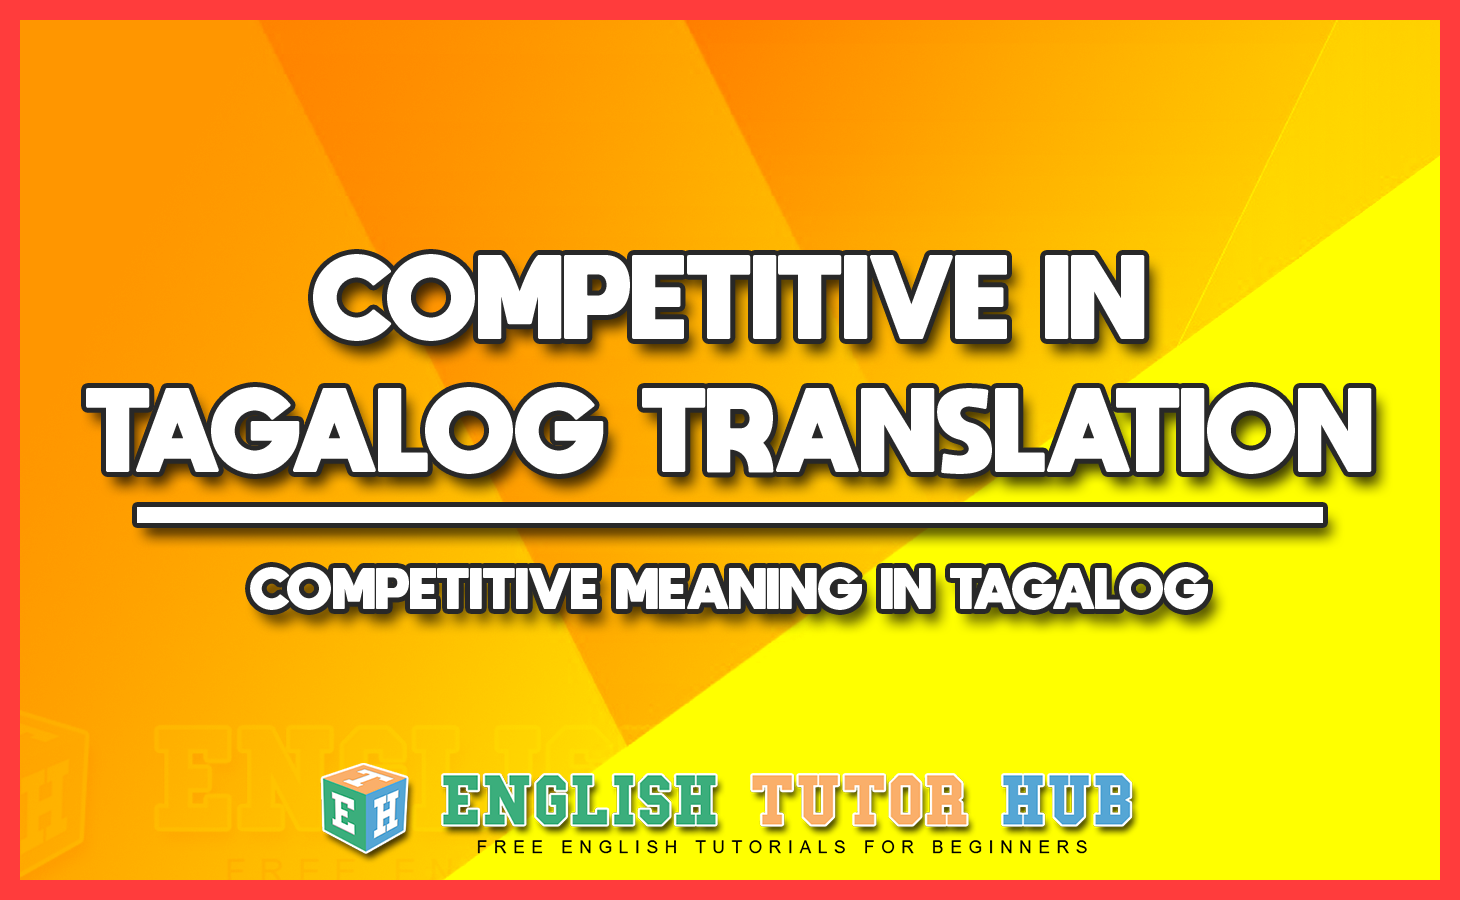 COMPETITIVE IN TAGALOG TRANSLATION - COMPETITIVE MEANING IN TAGALOG